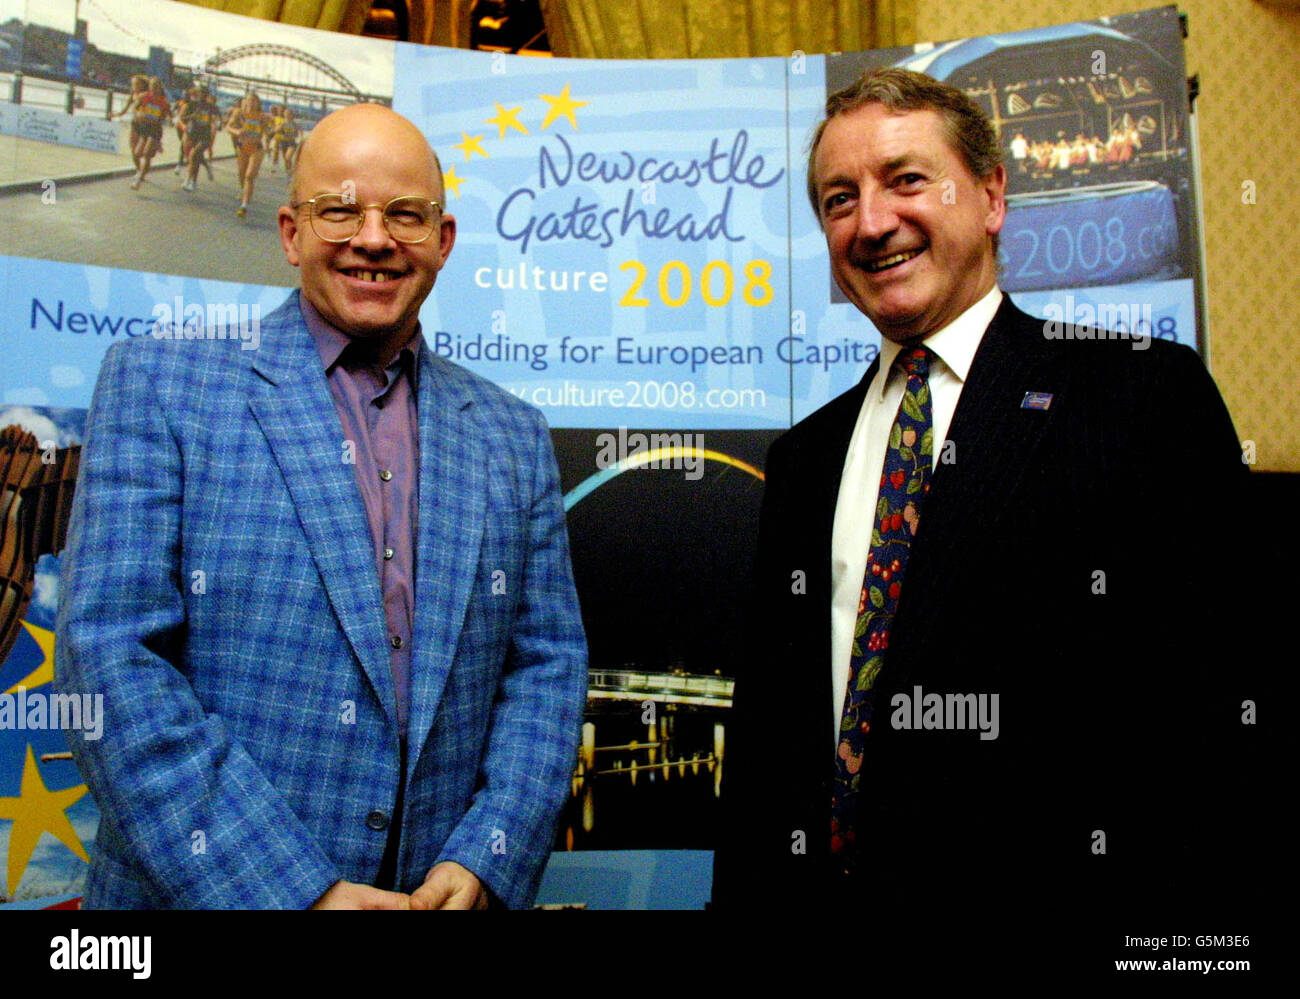 Writer of TV programmes Grafters and Monarch of the Glen, Michael Chaplin (left) with Sir Ian Wrigglesworth, the Chair of the Newcastle Gateshead Initiative which is spearheading the region's bid for European Capital of Culture in 2008. * at a reception at the House of Commons, London. Stock Photo